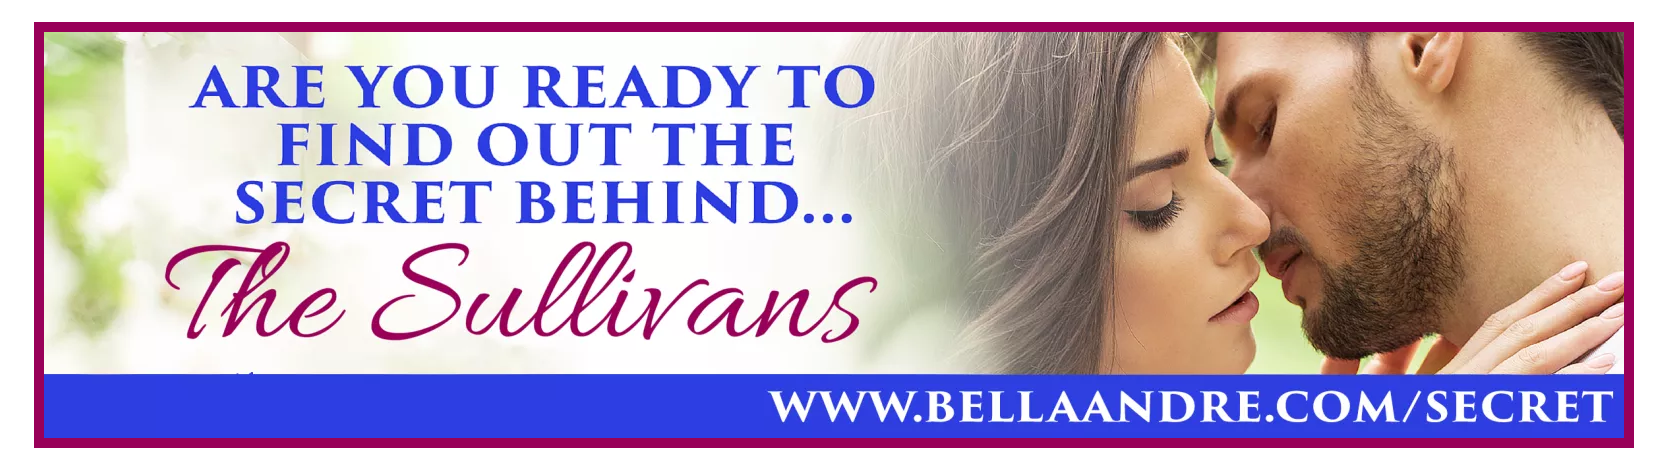 Are you ready to find out the secret behind the Sullivans?